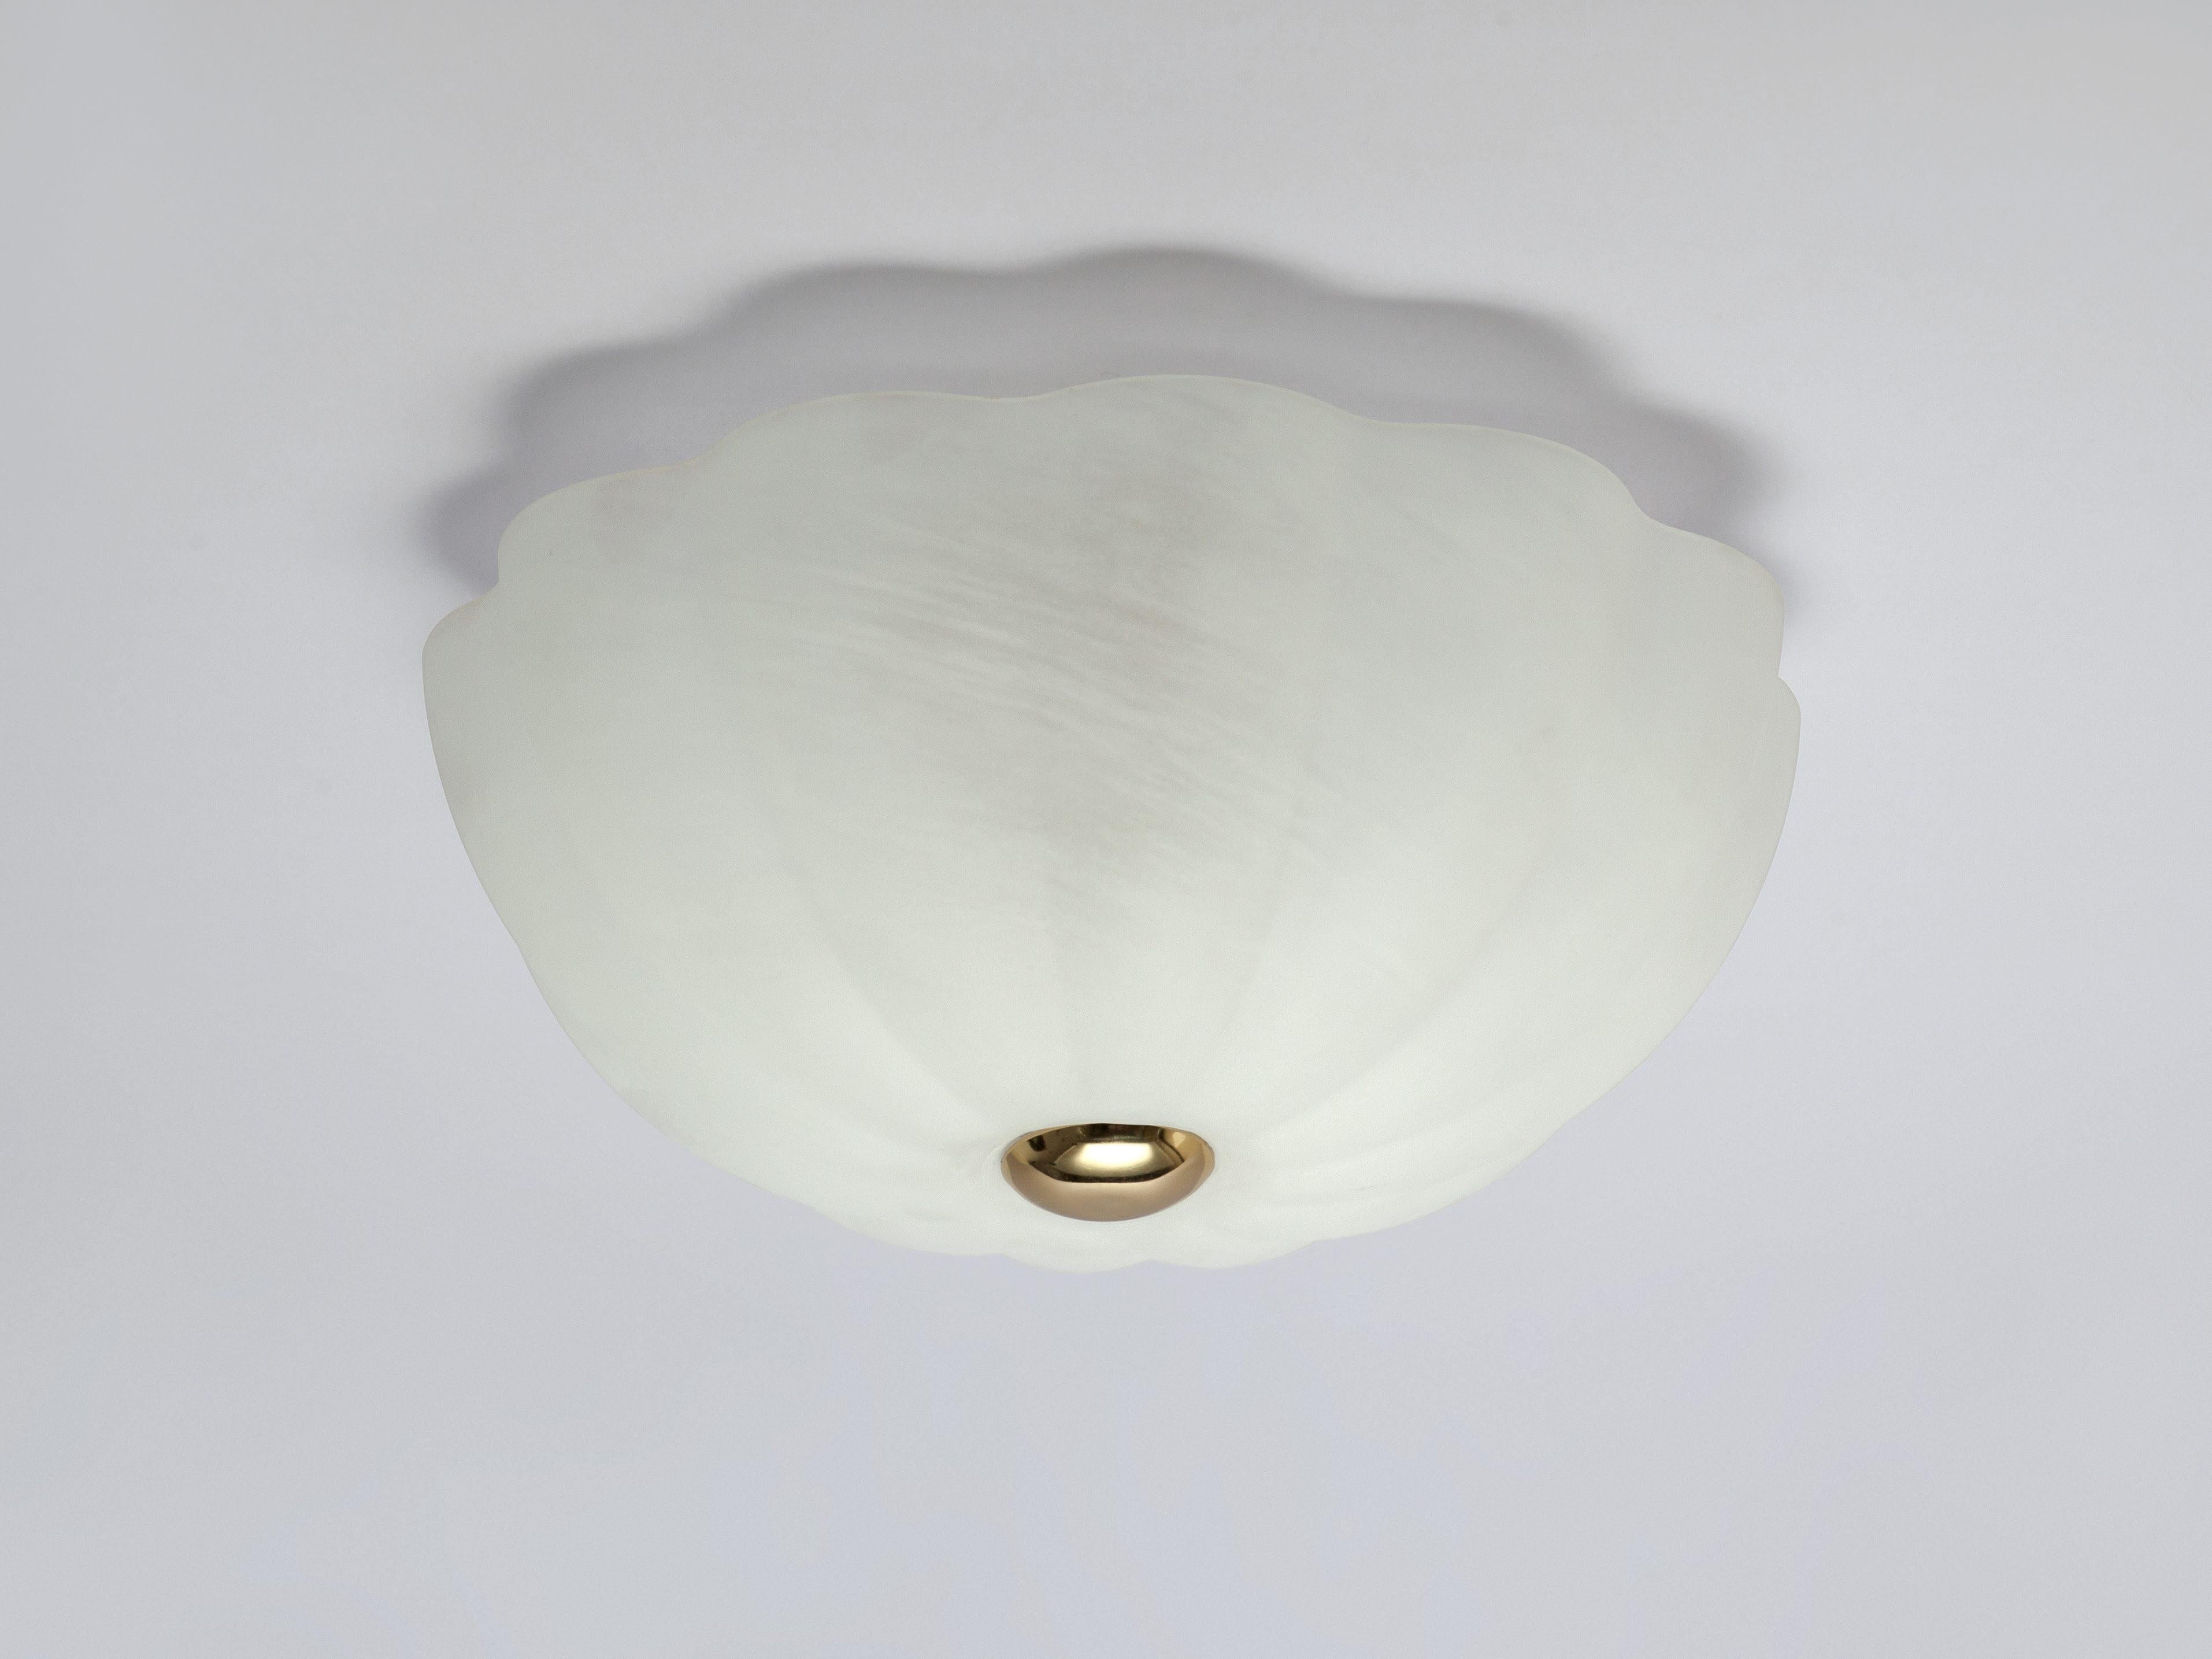 This low profile flush fit ceiling light is perfect for low ceilings or as a striking sculptural focal point. The flower shaped opal glass shade diffuses a warm illuminating glow. Rich and opulent, the brass detail add a luxurious finish to the soft